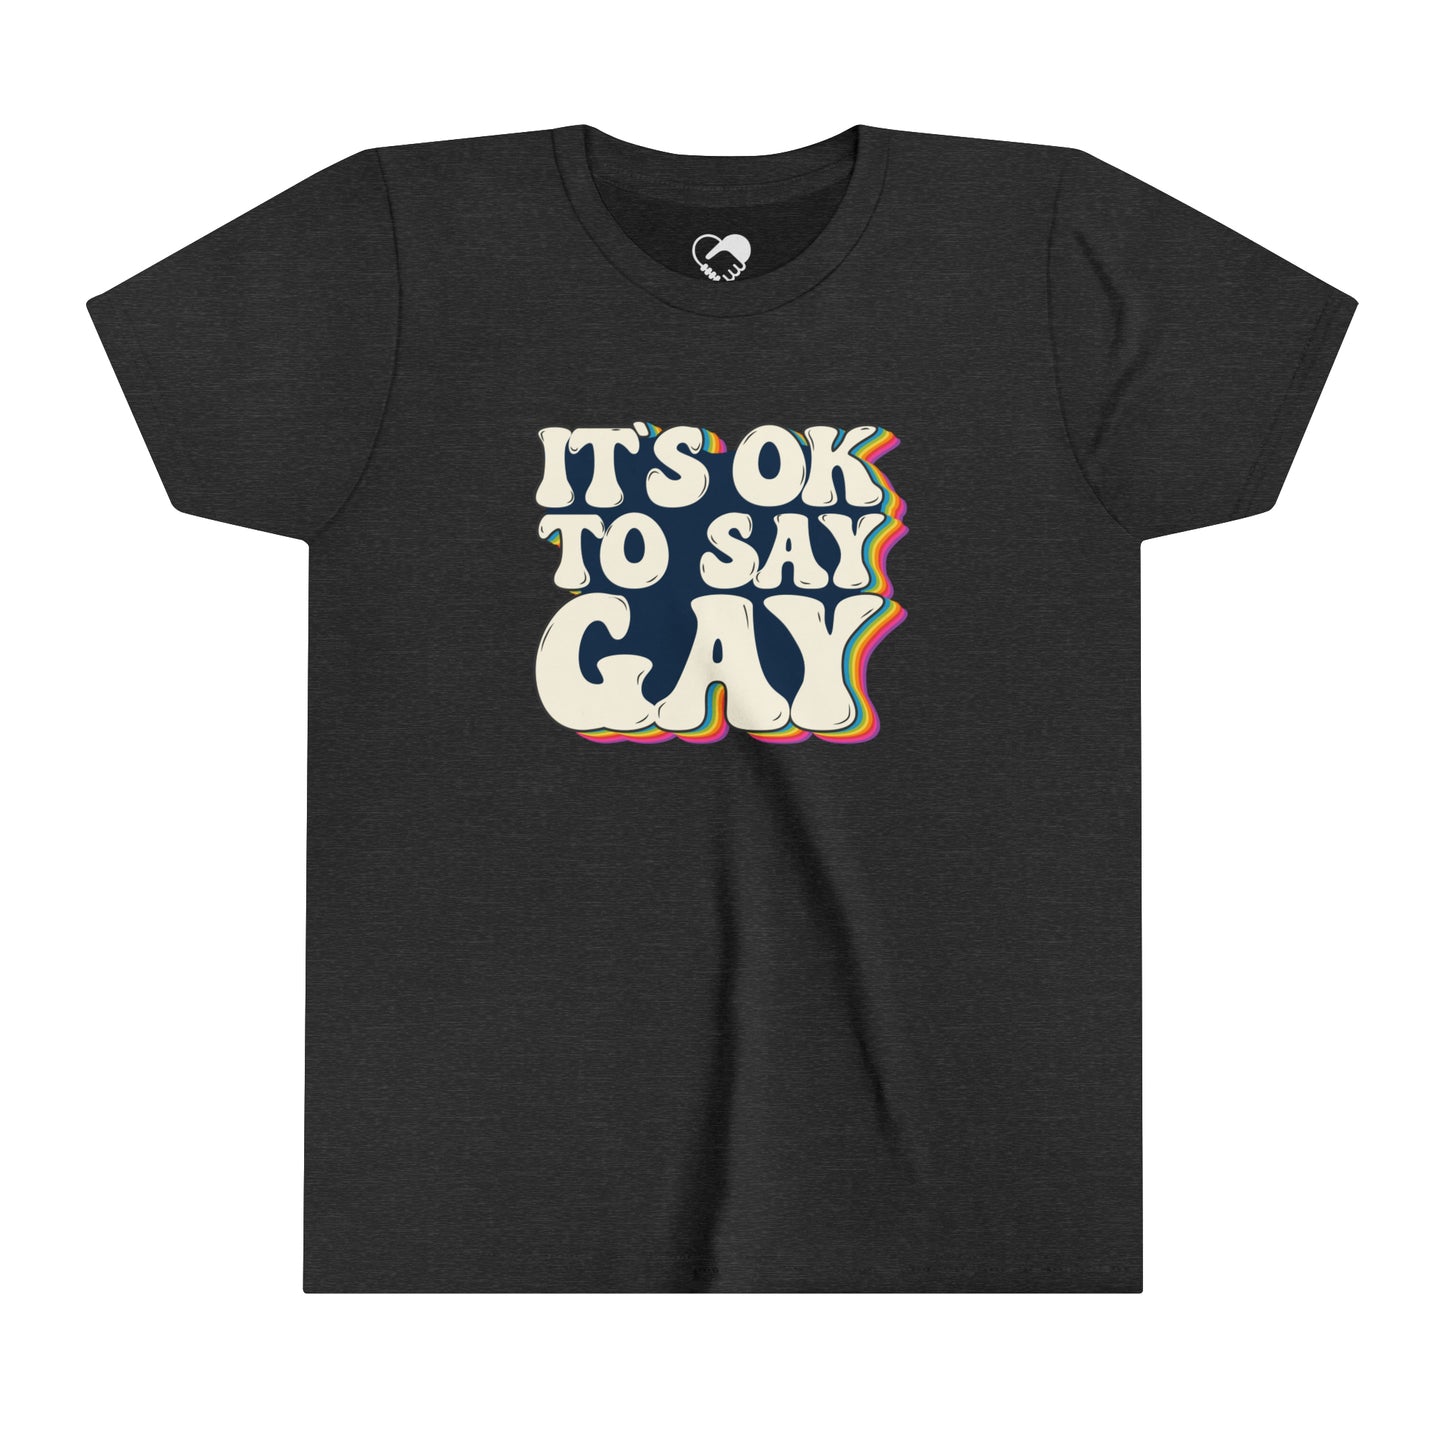 “It’s OK to Say Gay” Youth T-Shirt